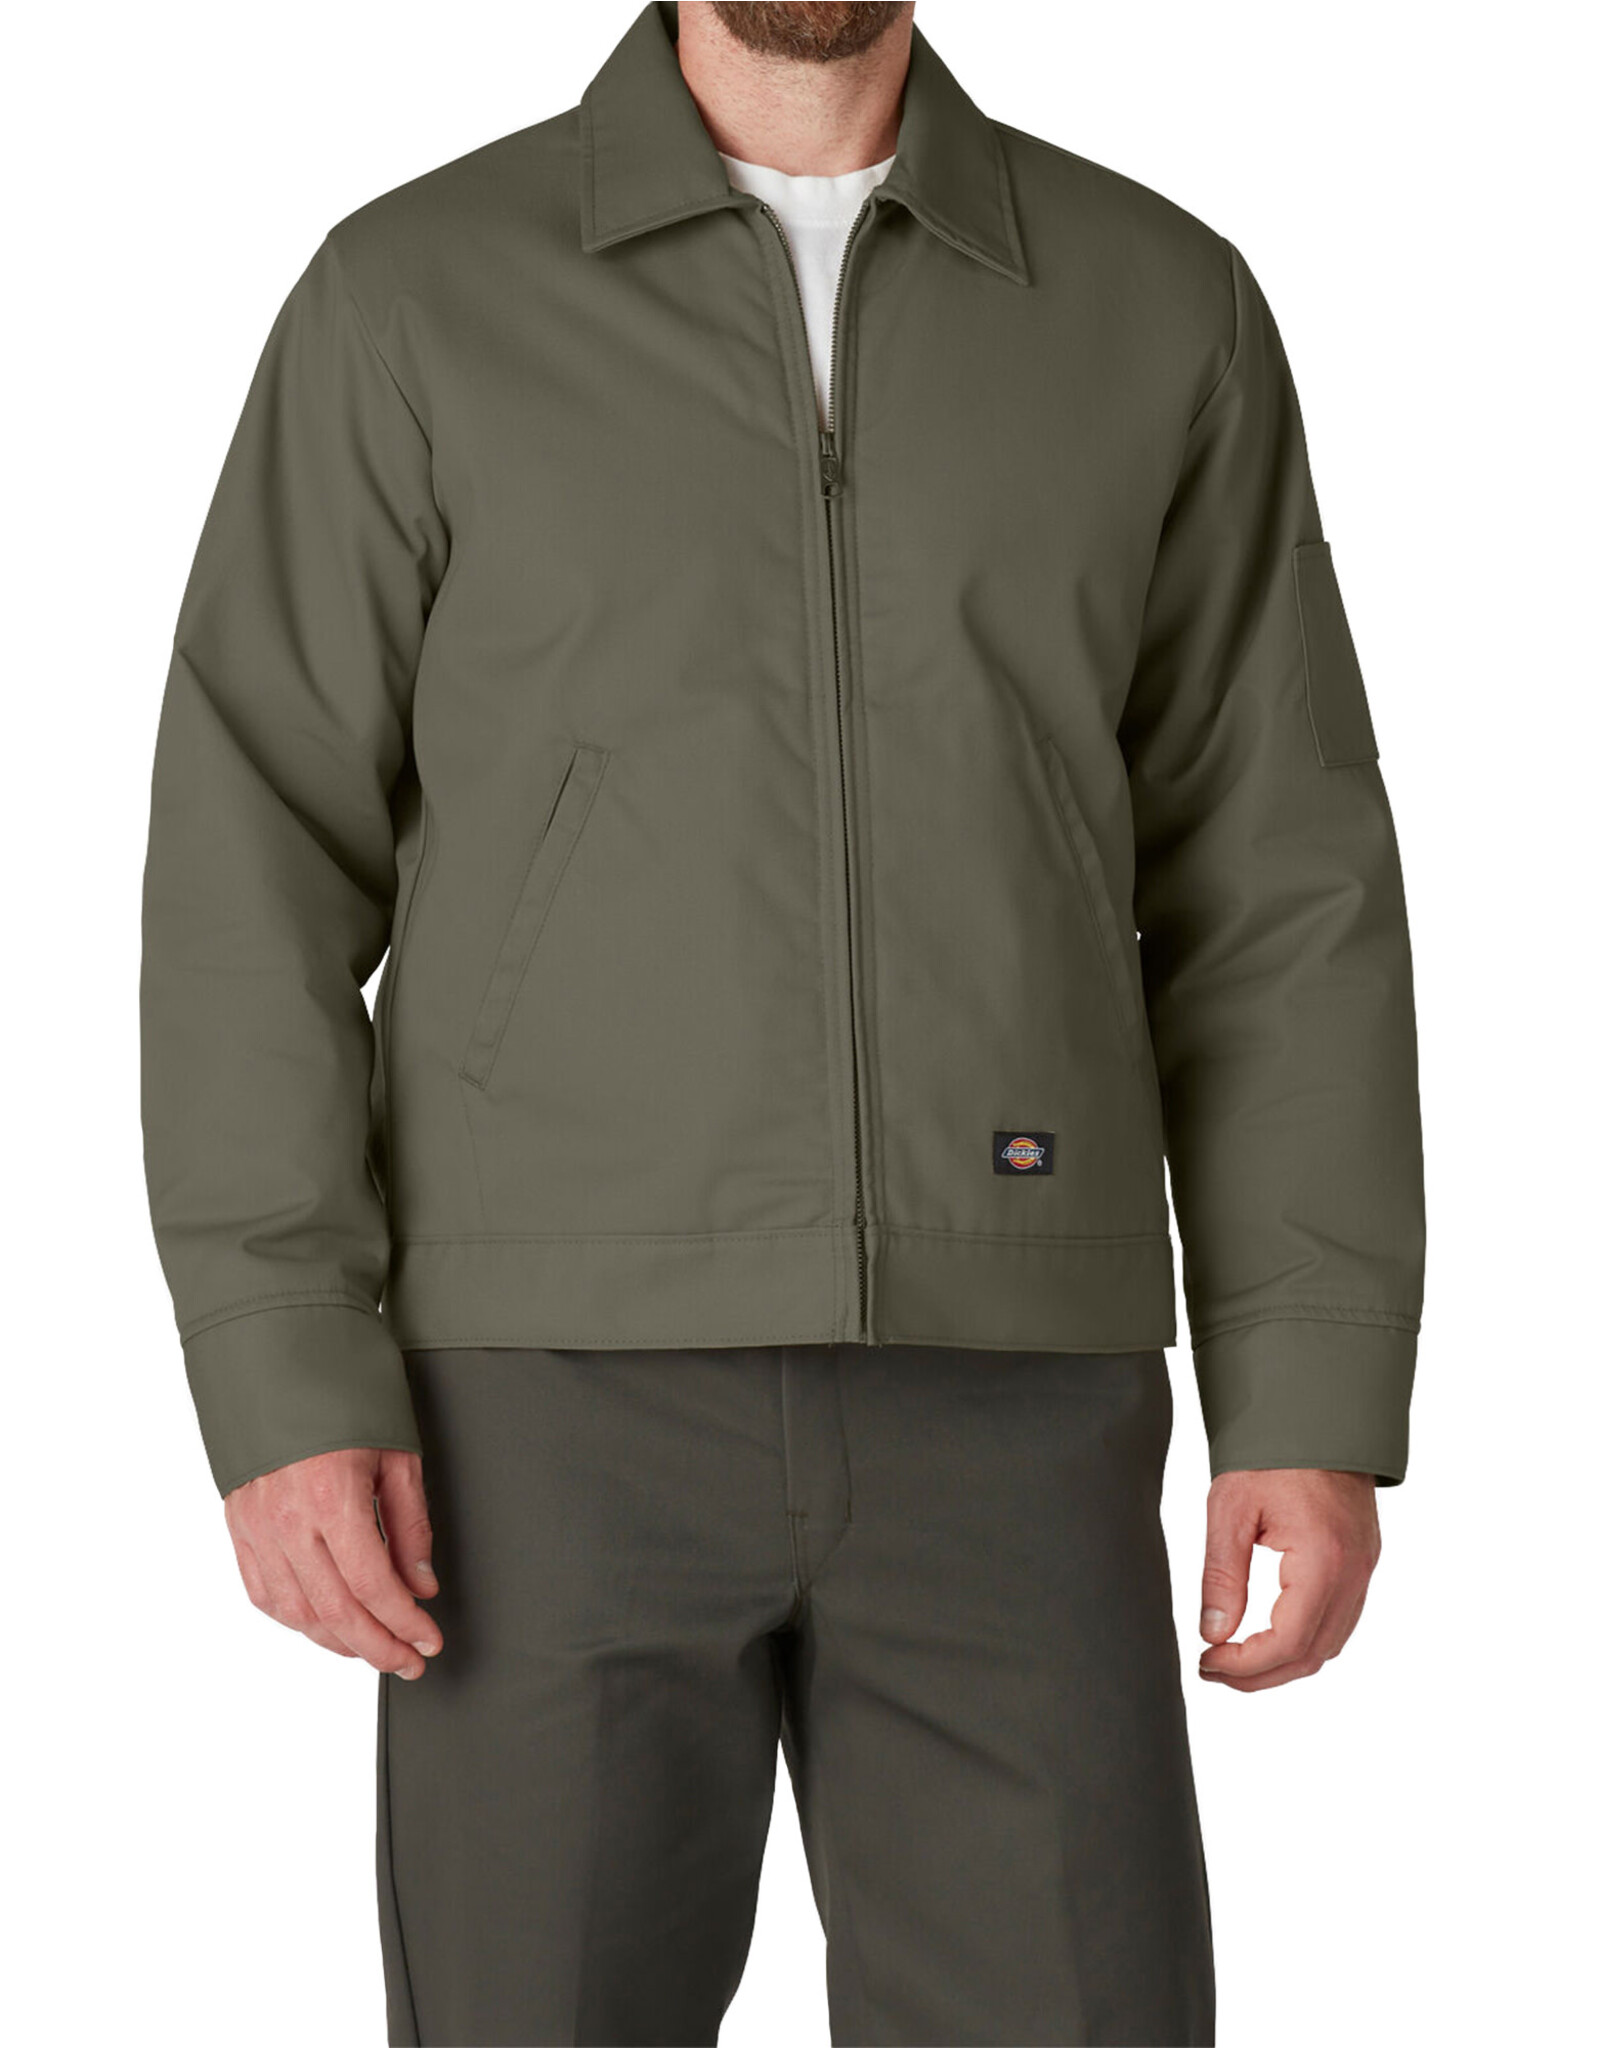 DICKIES Insulated Eisenhower Jacket Moss Green - TJ15MS